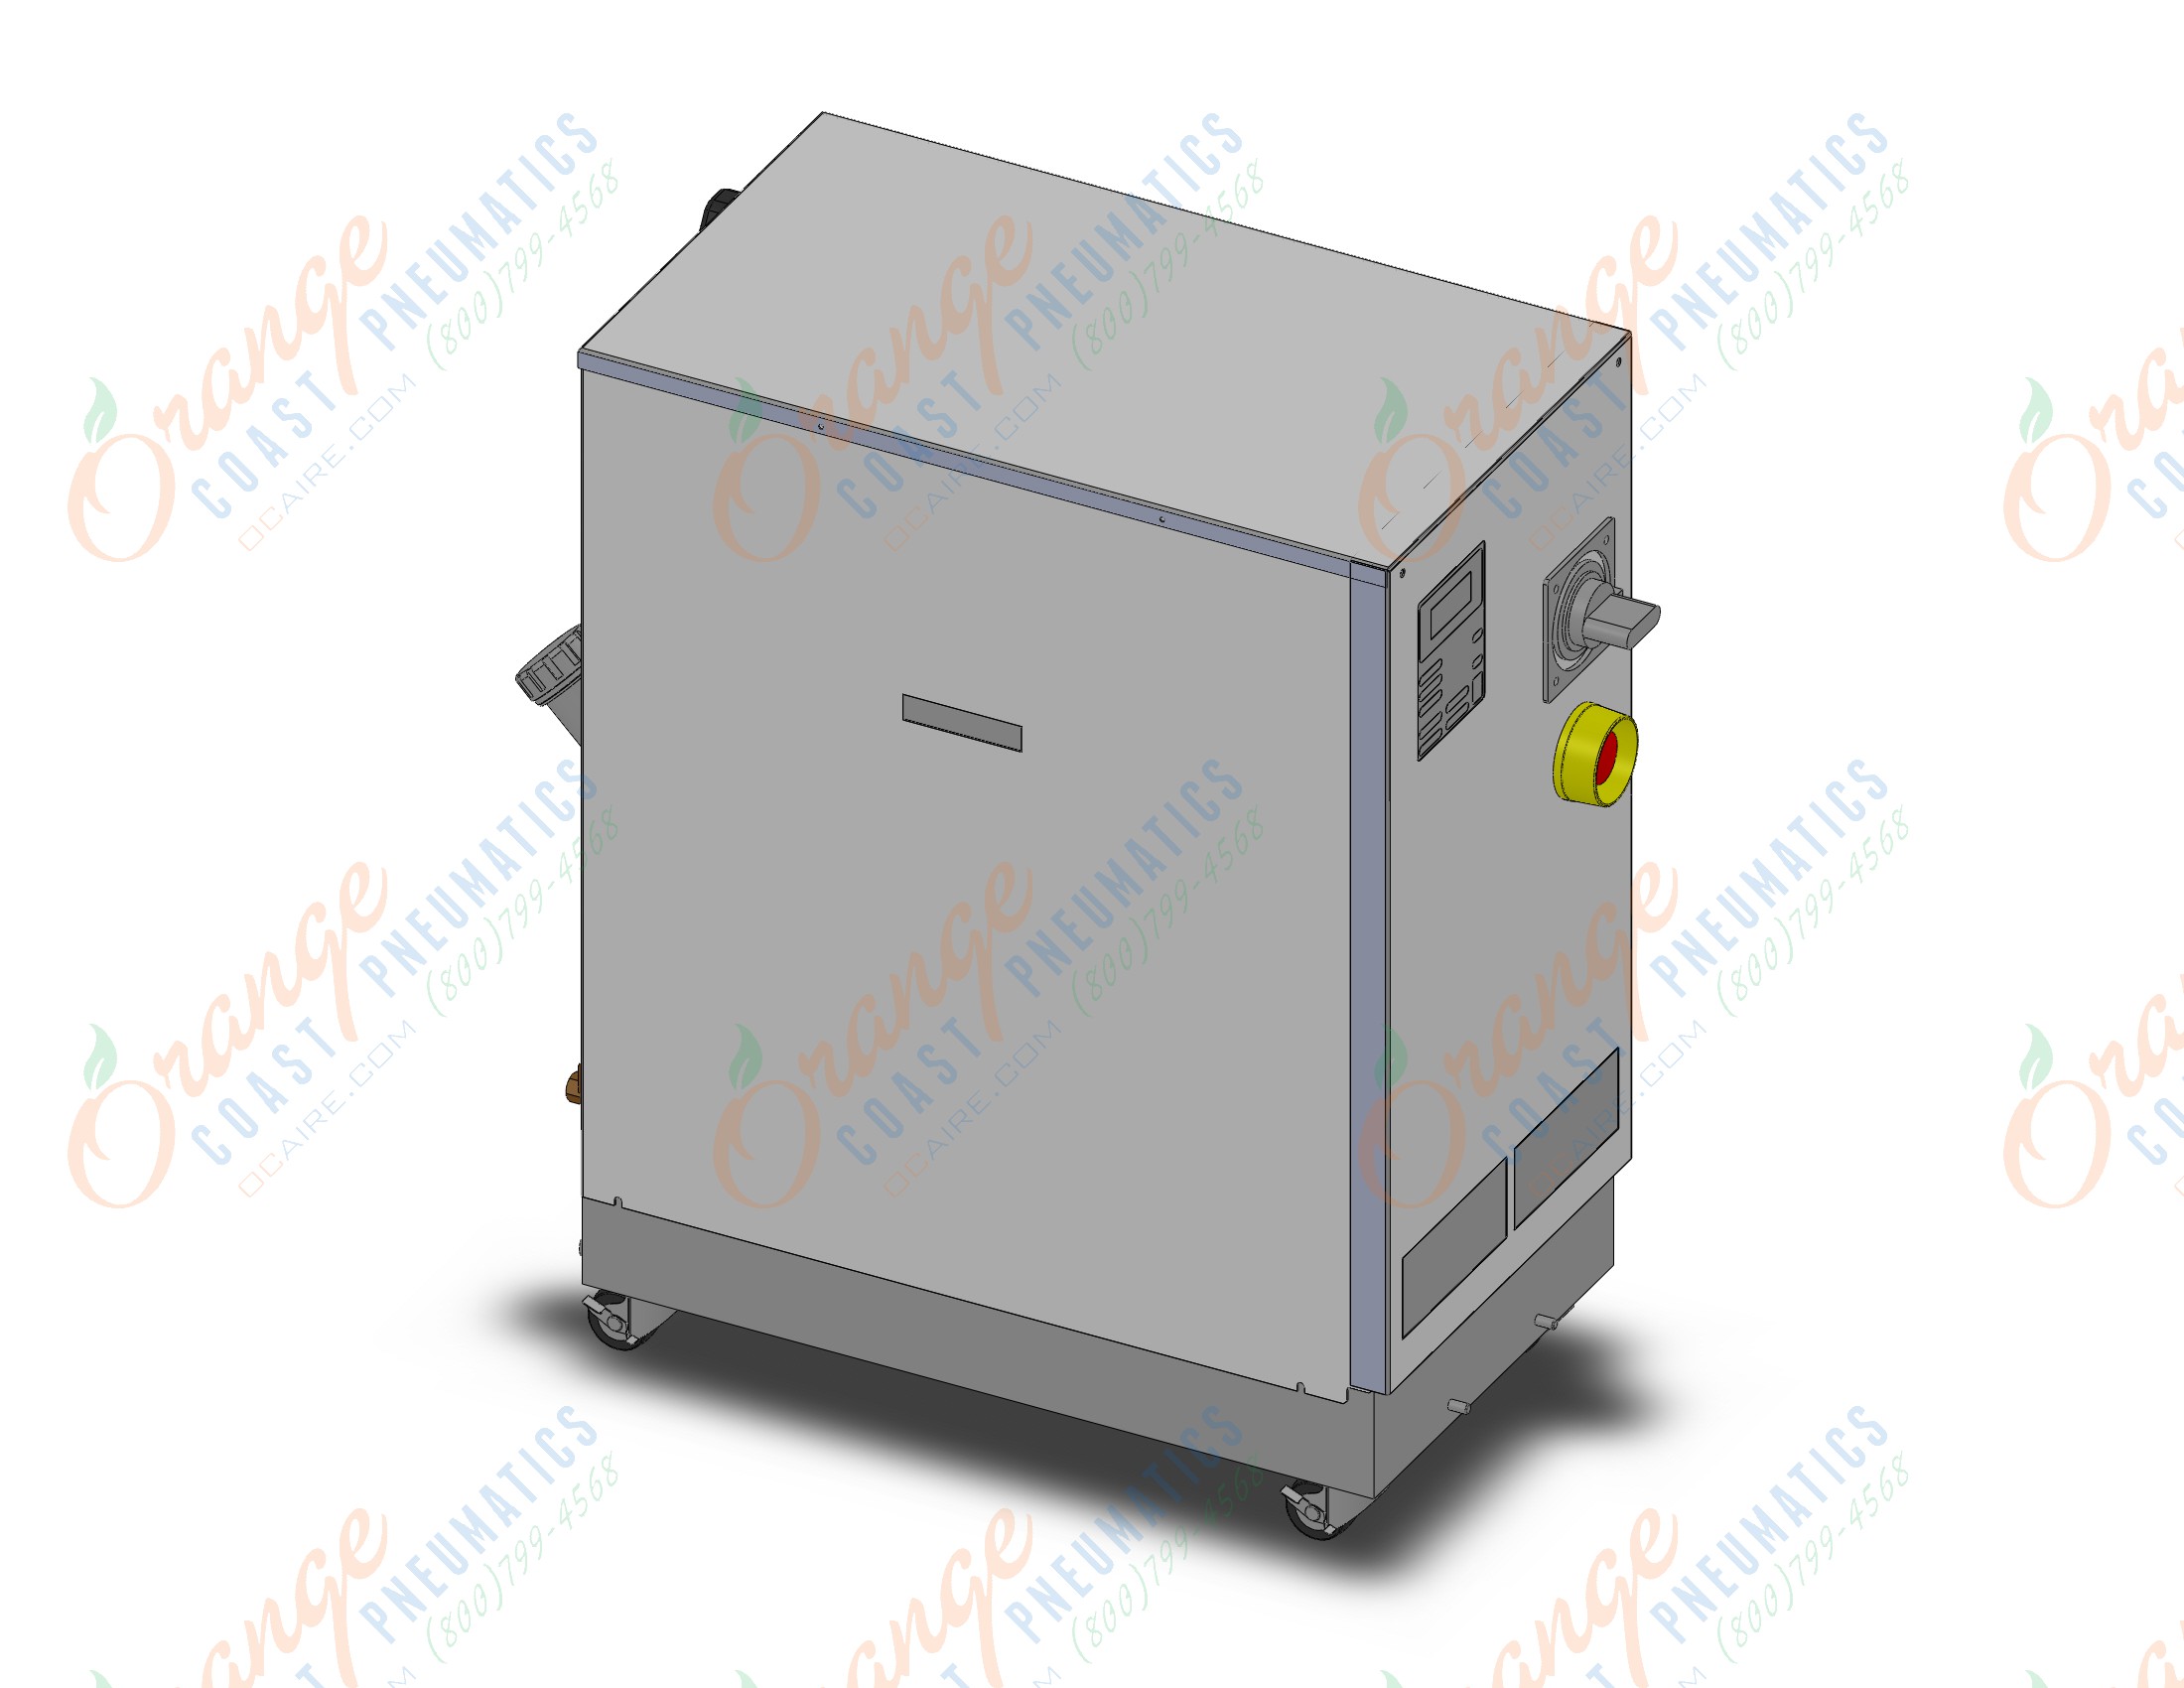 SMC HRW030-H1 thermo chiller, THERMO CHILLER, WATER COOLED